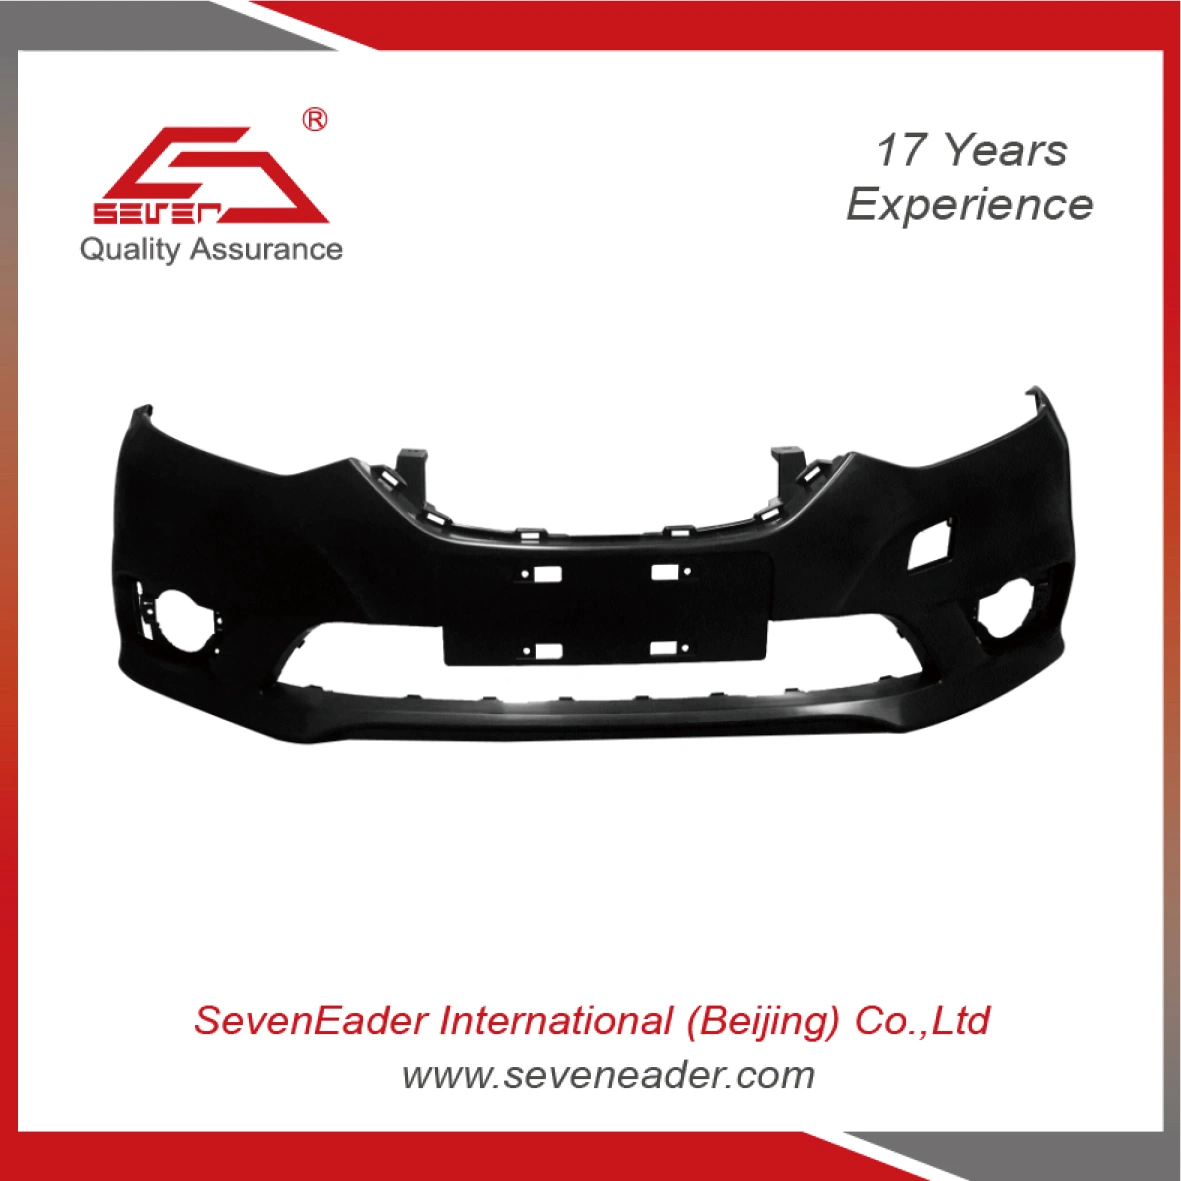 Auto Car Spare Parts Front Bumper for Nissan Sylphy / Sentra 2016-